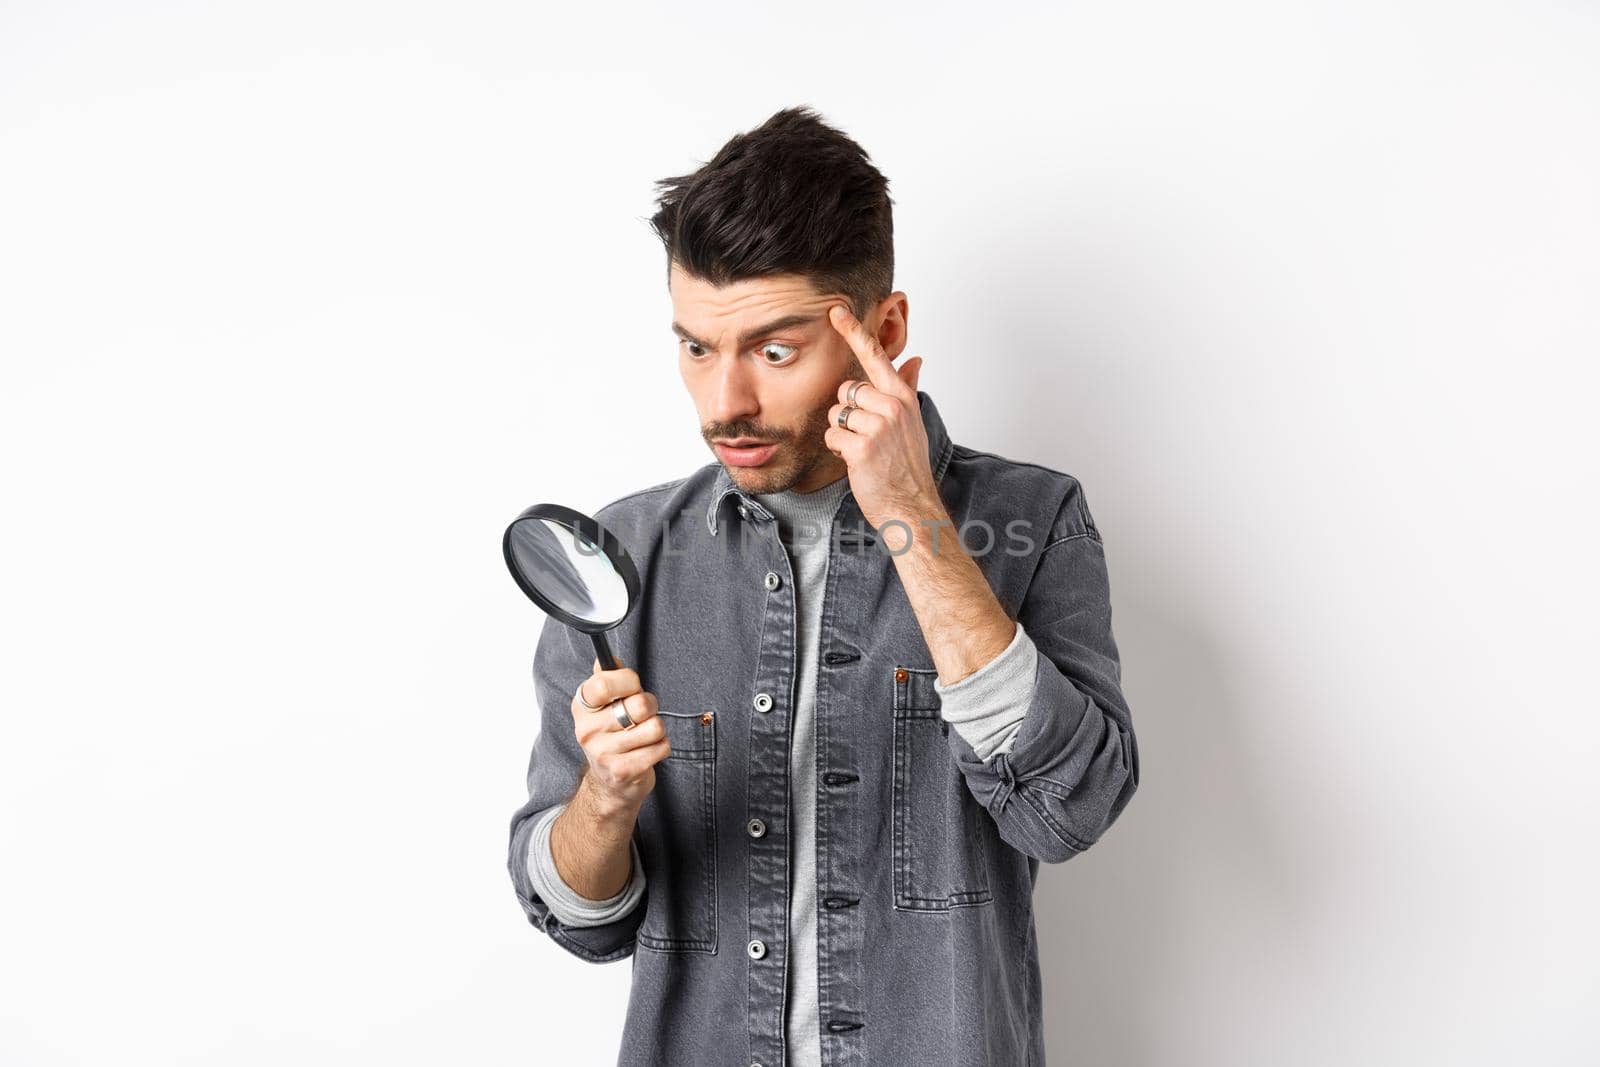 Man looking through magnifying glass and stretching eyelid to see clearly, standing on white background.